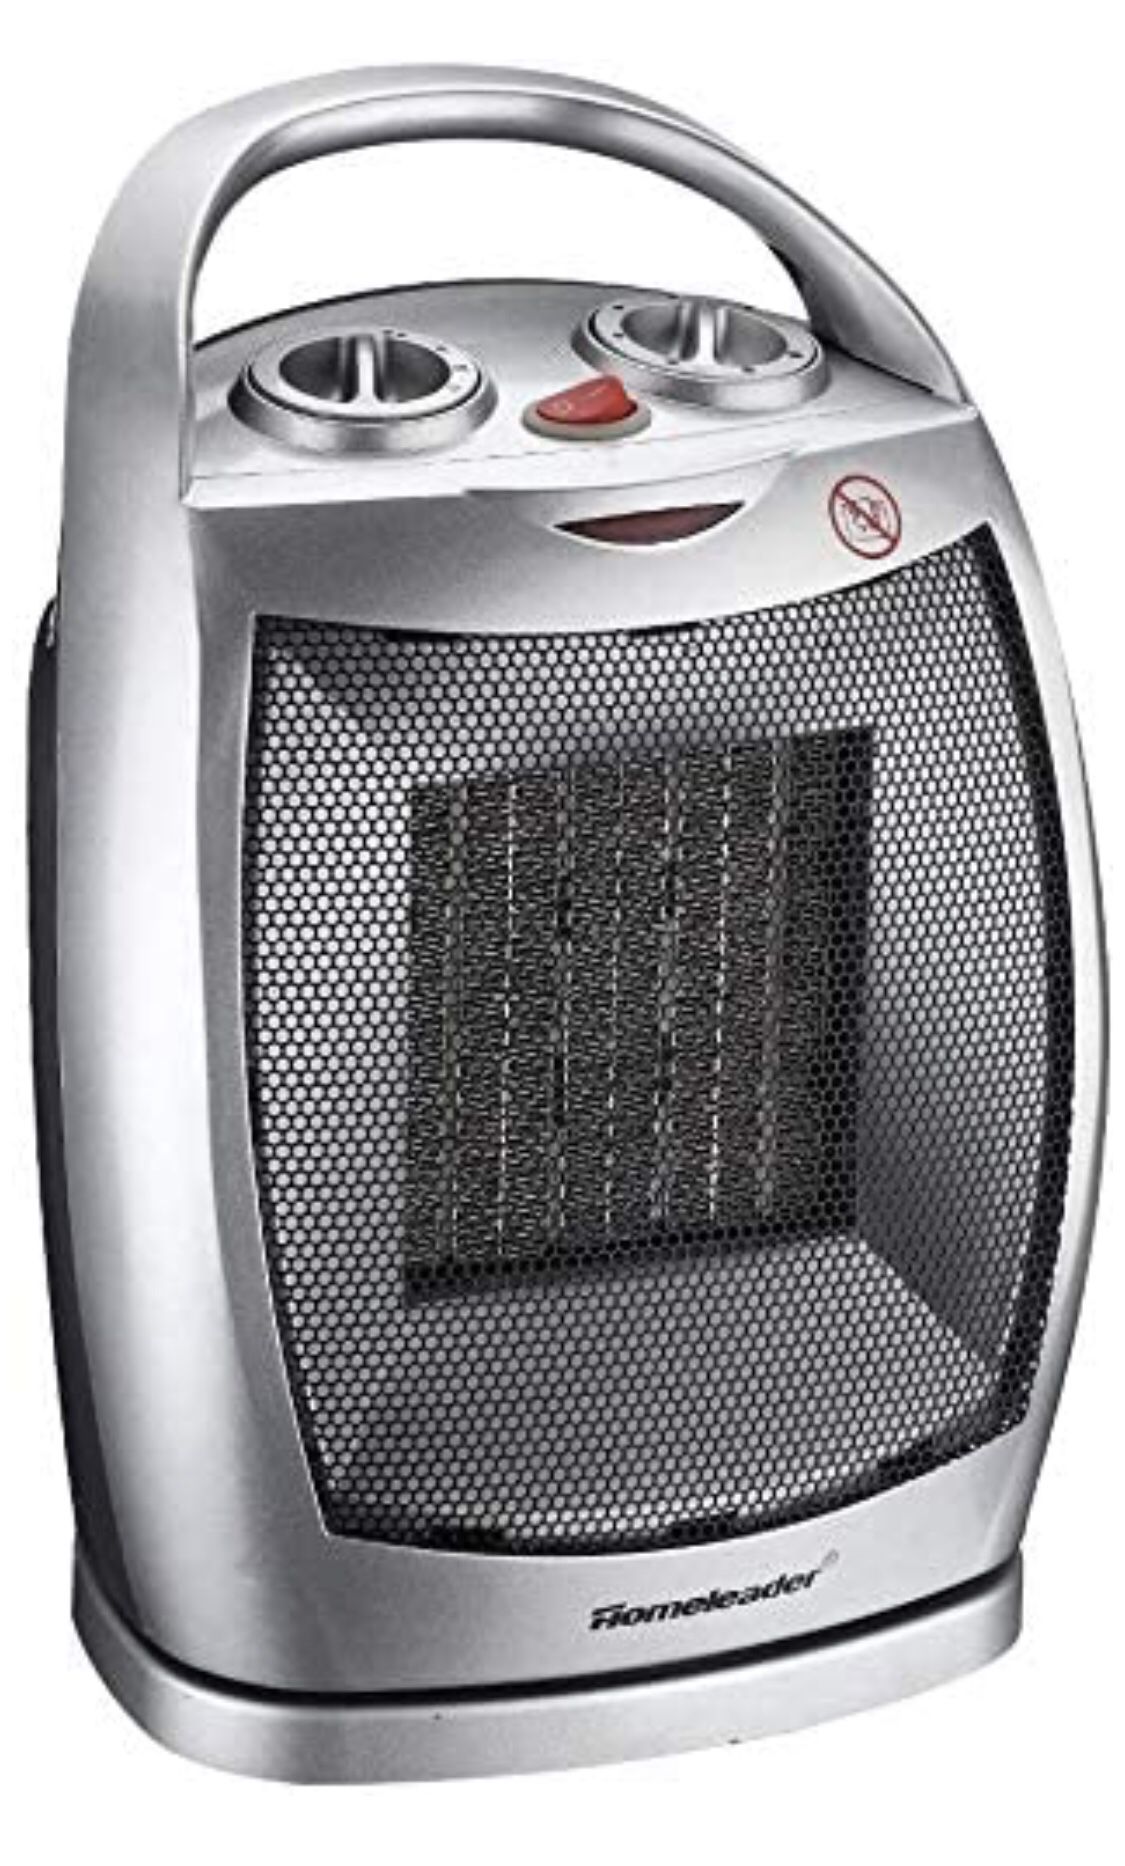 Homeleader Portable Electric Space Heater, Electric Heater with Thermostat, Ceramic Heater with Tip Over Switch, for Home and Office, 750W/1500W